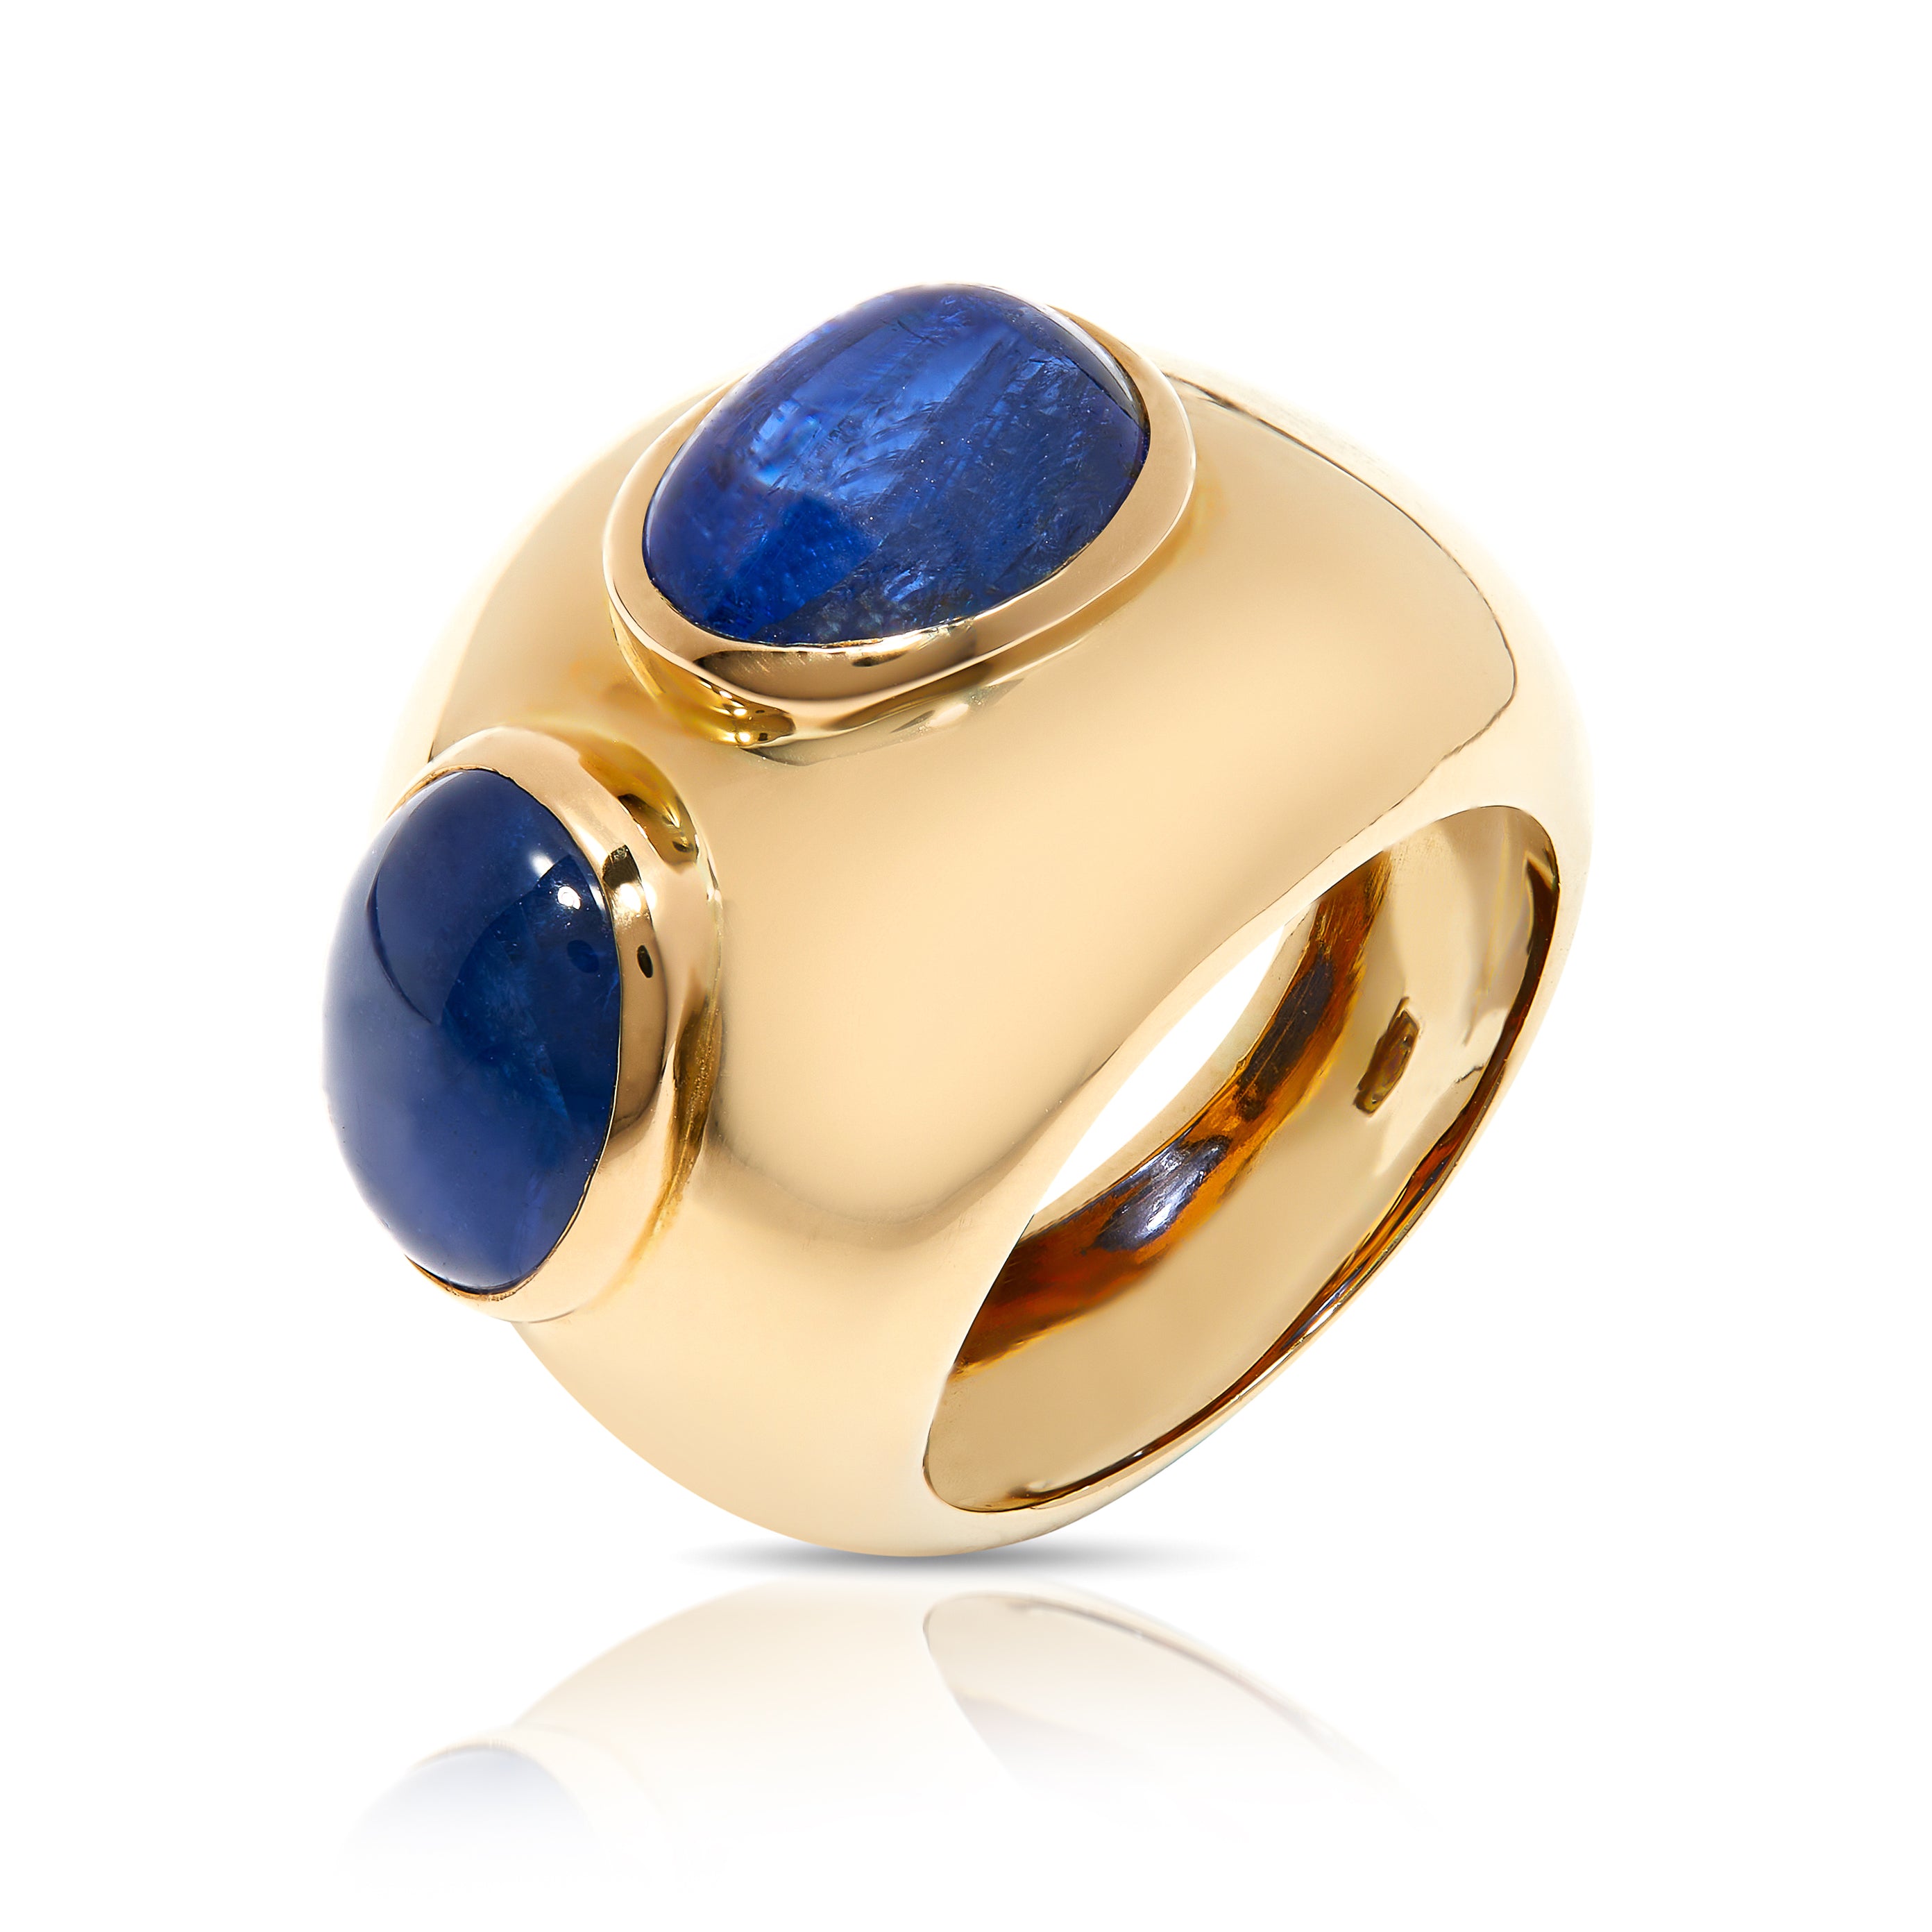 Bombé 18ct gold cocktail ring with two sapphire cabochons.